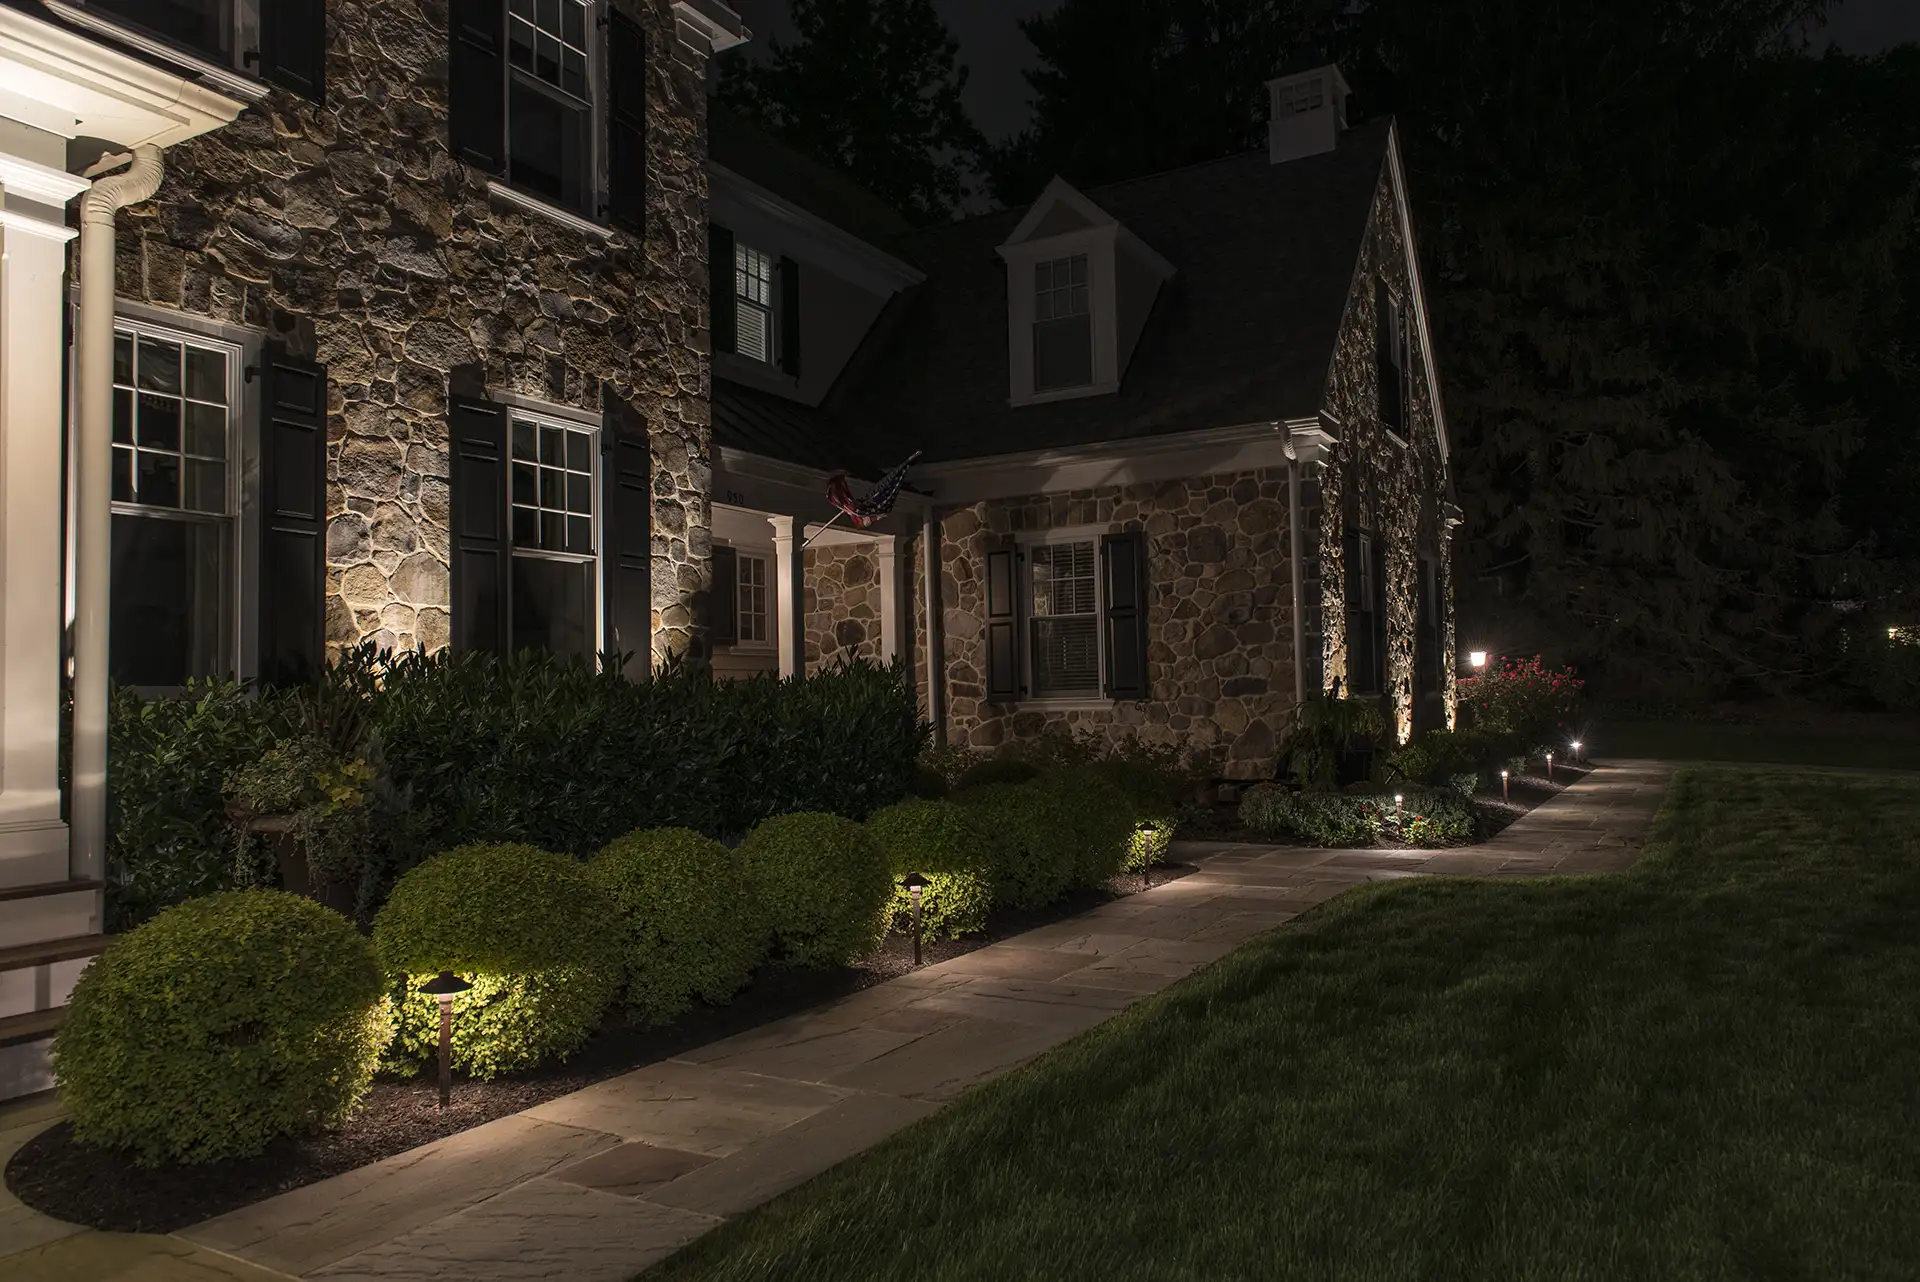 Constitution Way image 1 Lighthouse Outdoor Lighting and Audio West Chester PA